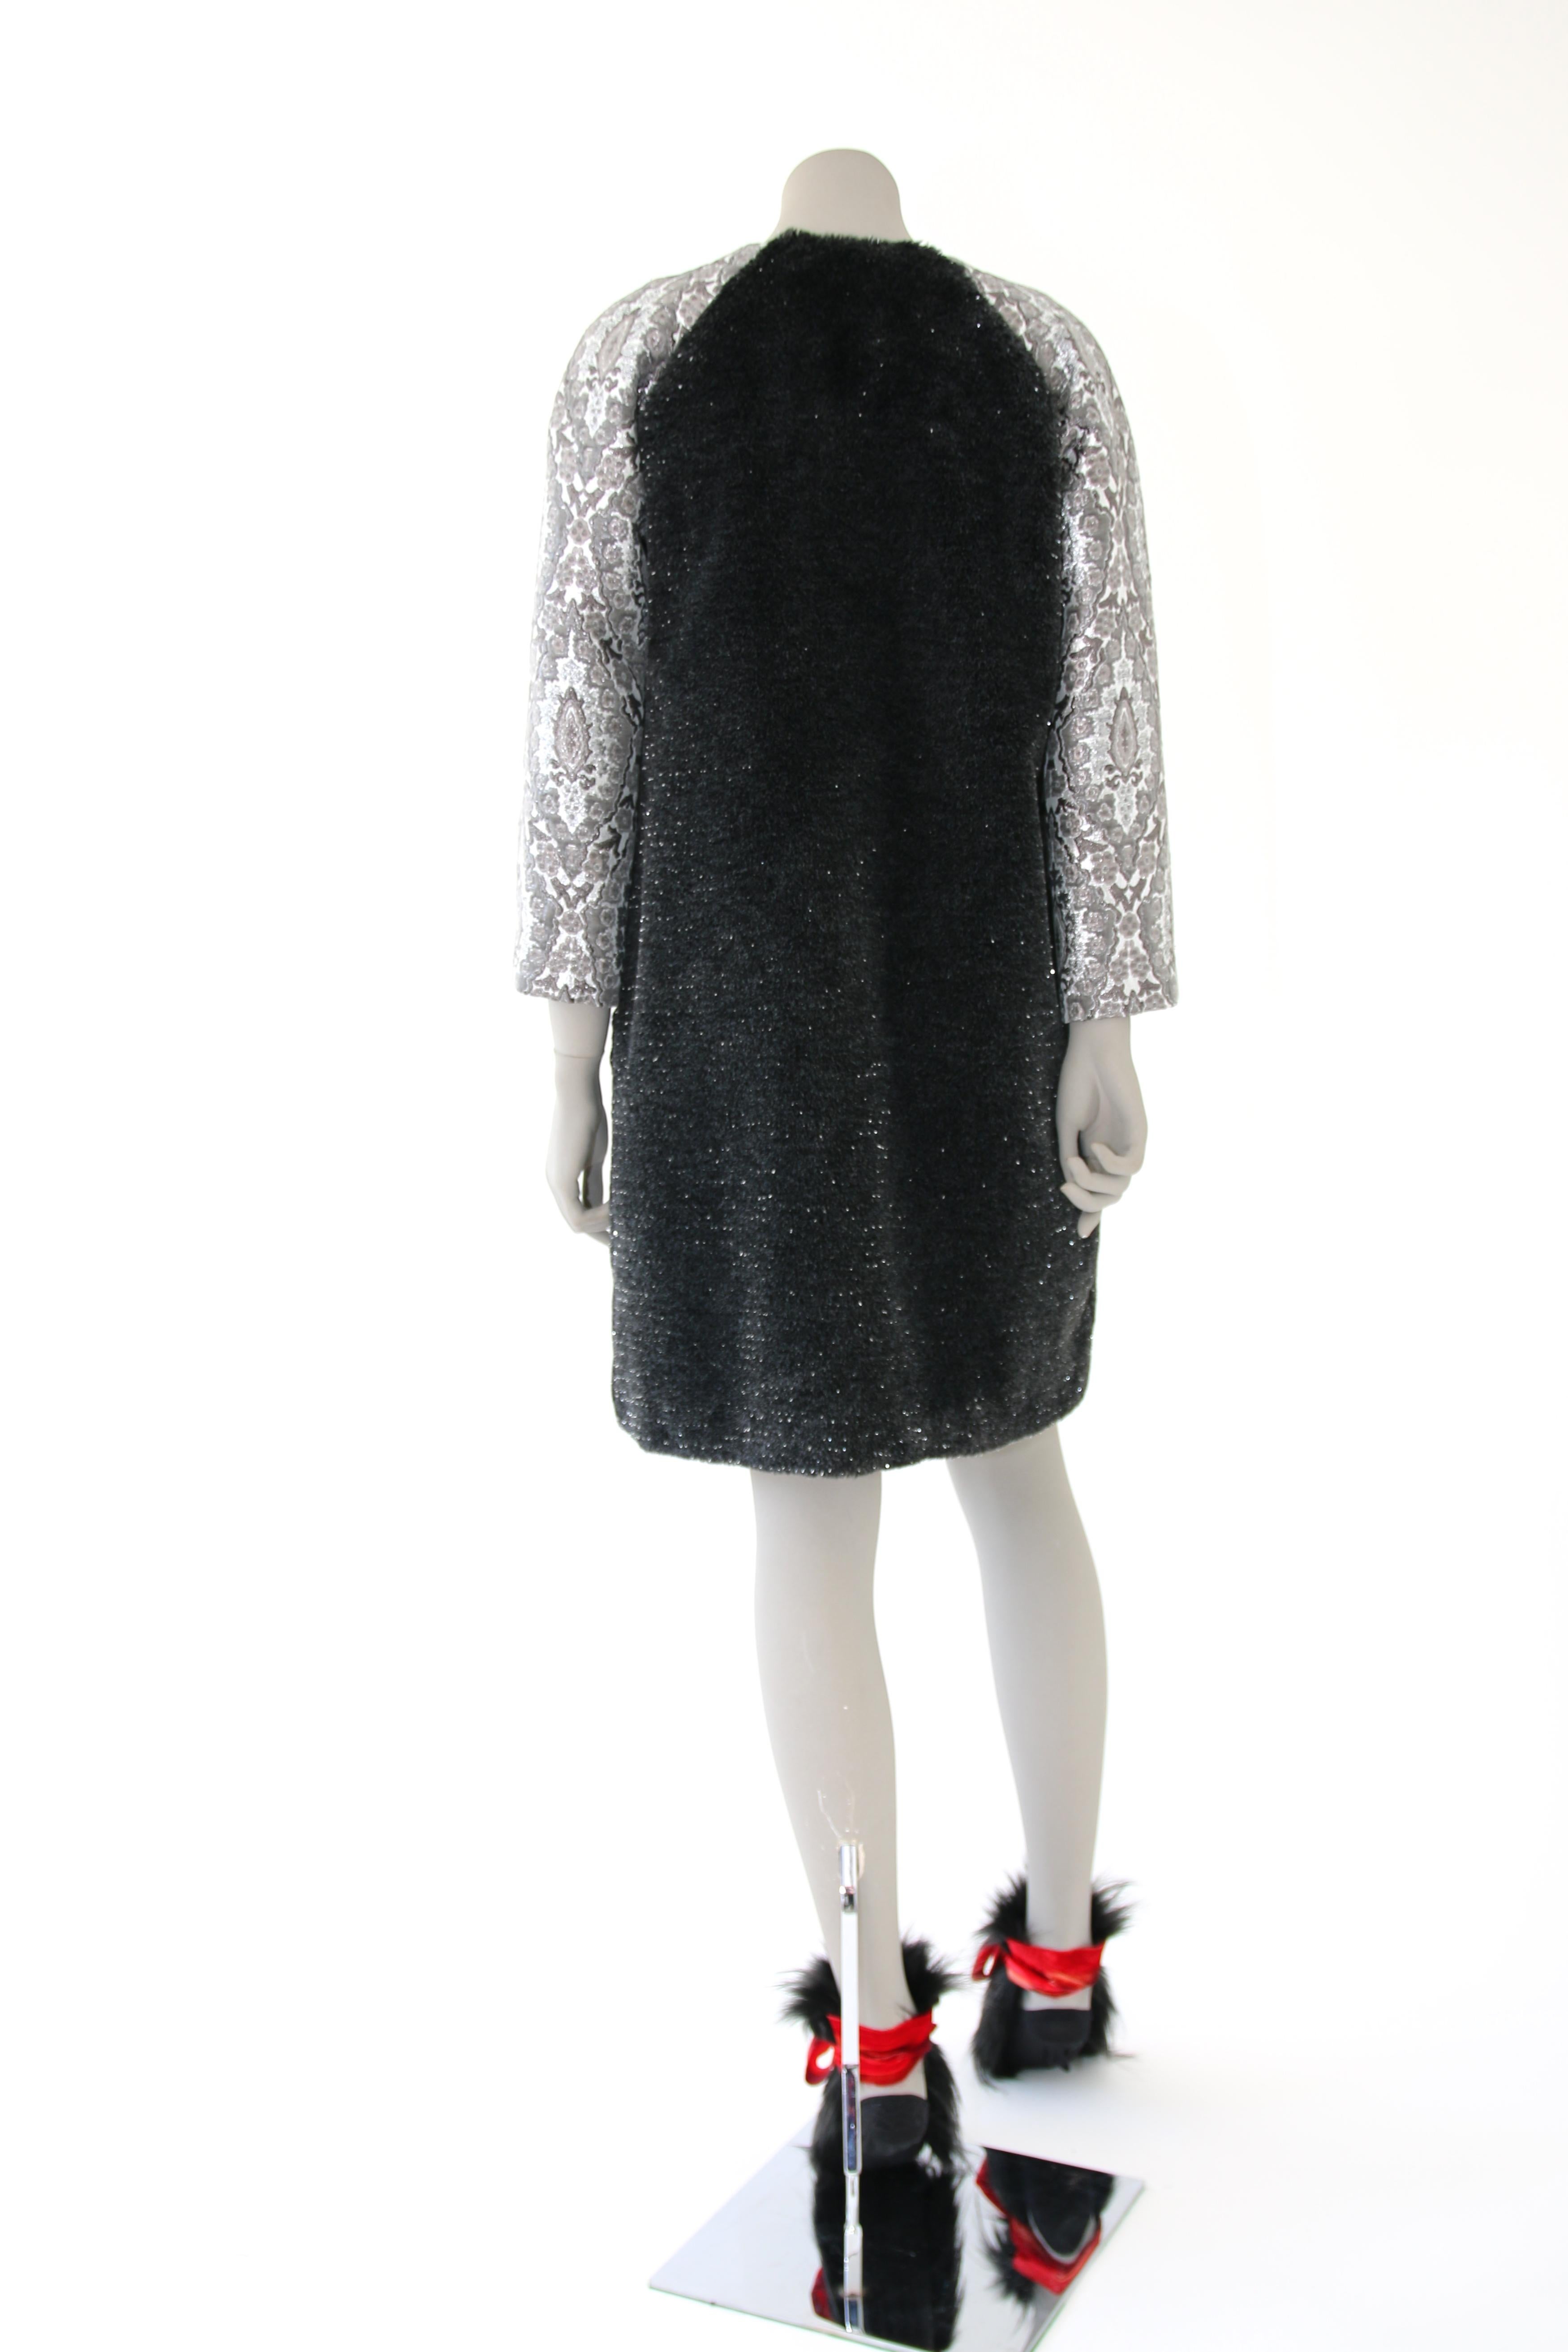 Pelush Black Faux Fur Mink Coat with Vintage Crystals and Damask Brocade - XS In New Condition For Sale In Greenwich, CT